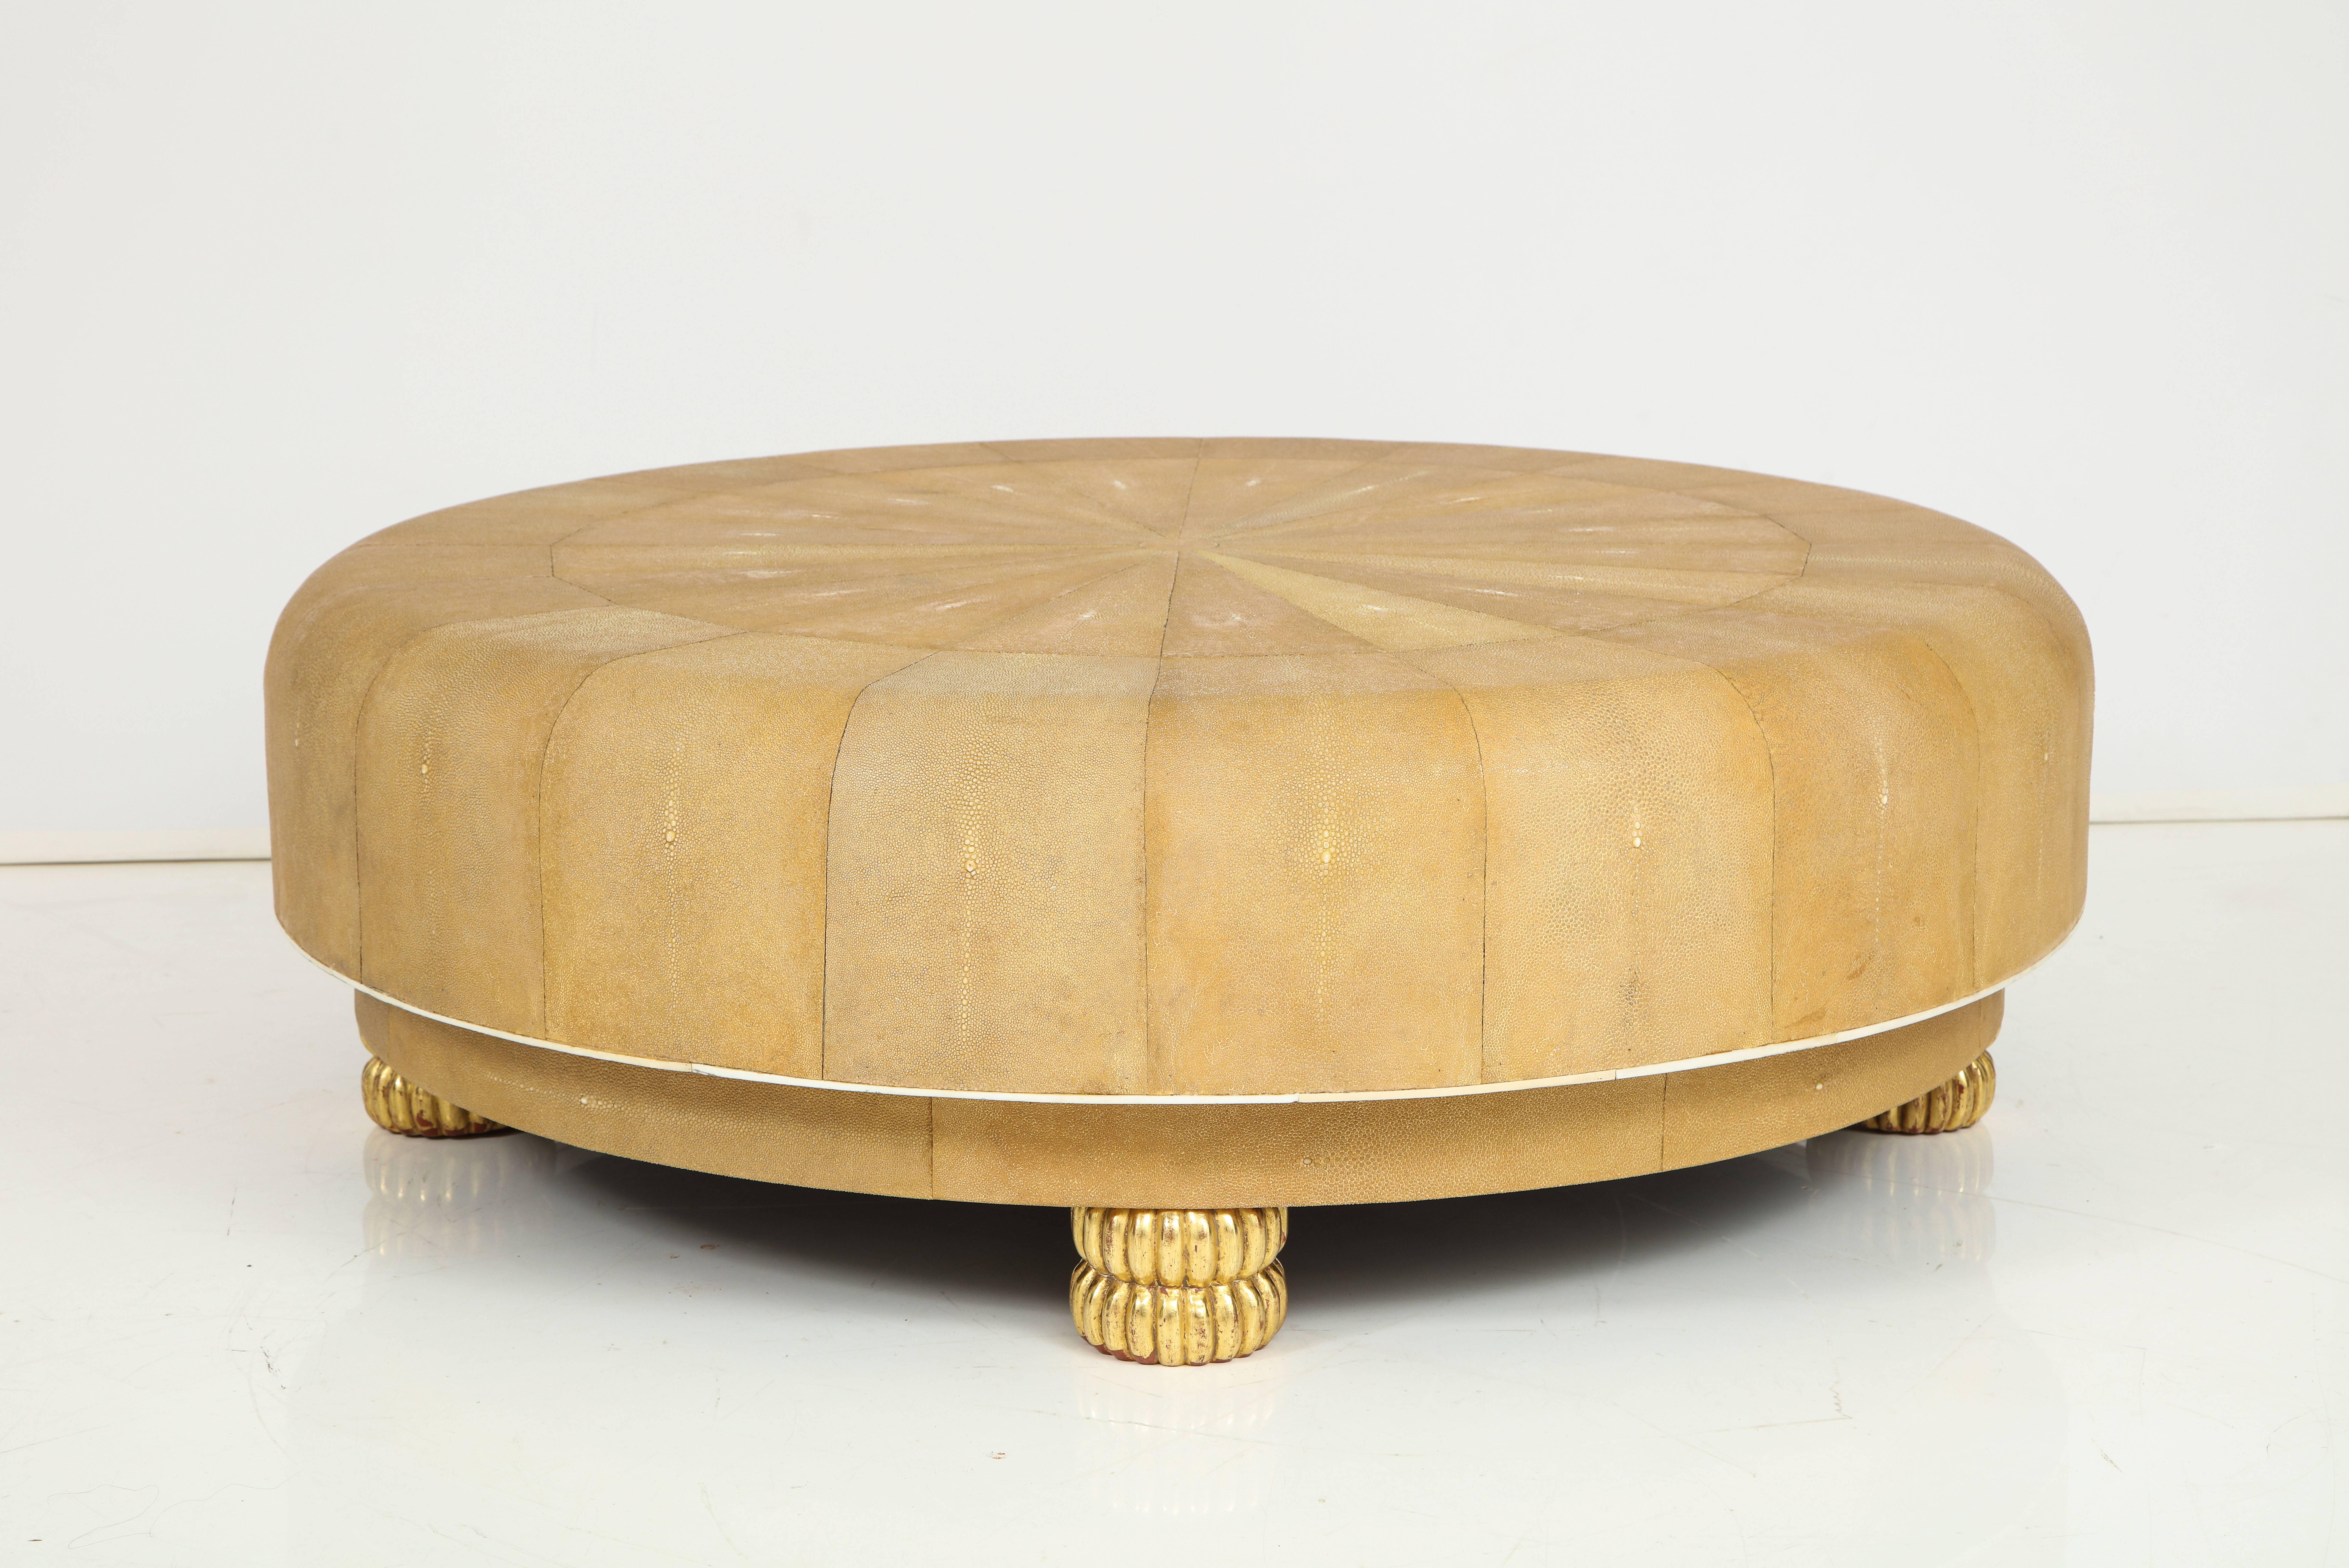 Late 20th Century Shagreen Sunburst Coffee Table, Attributed to Karl Springer